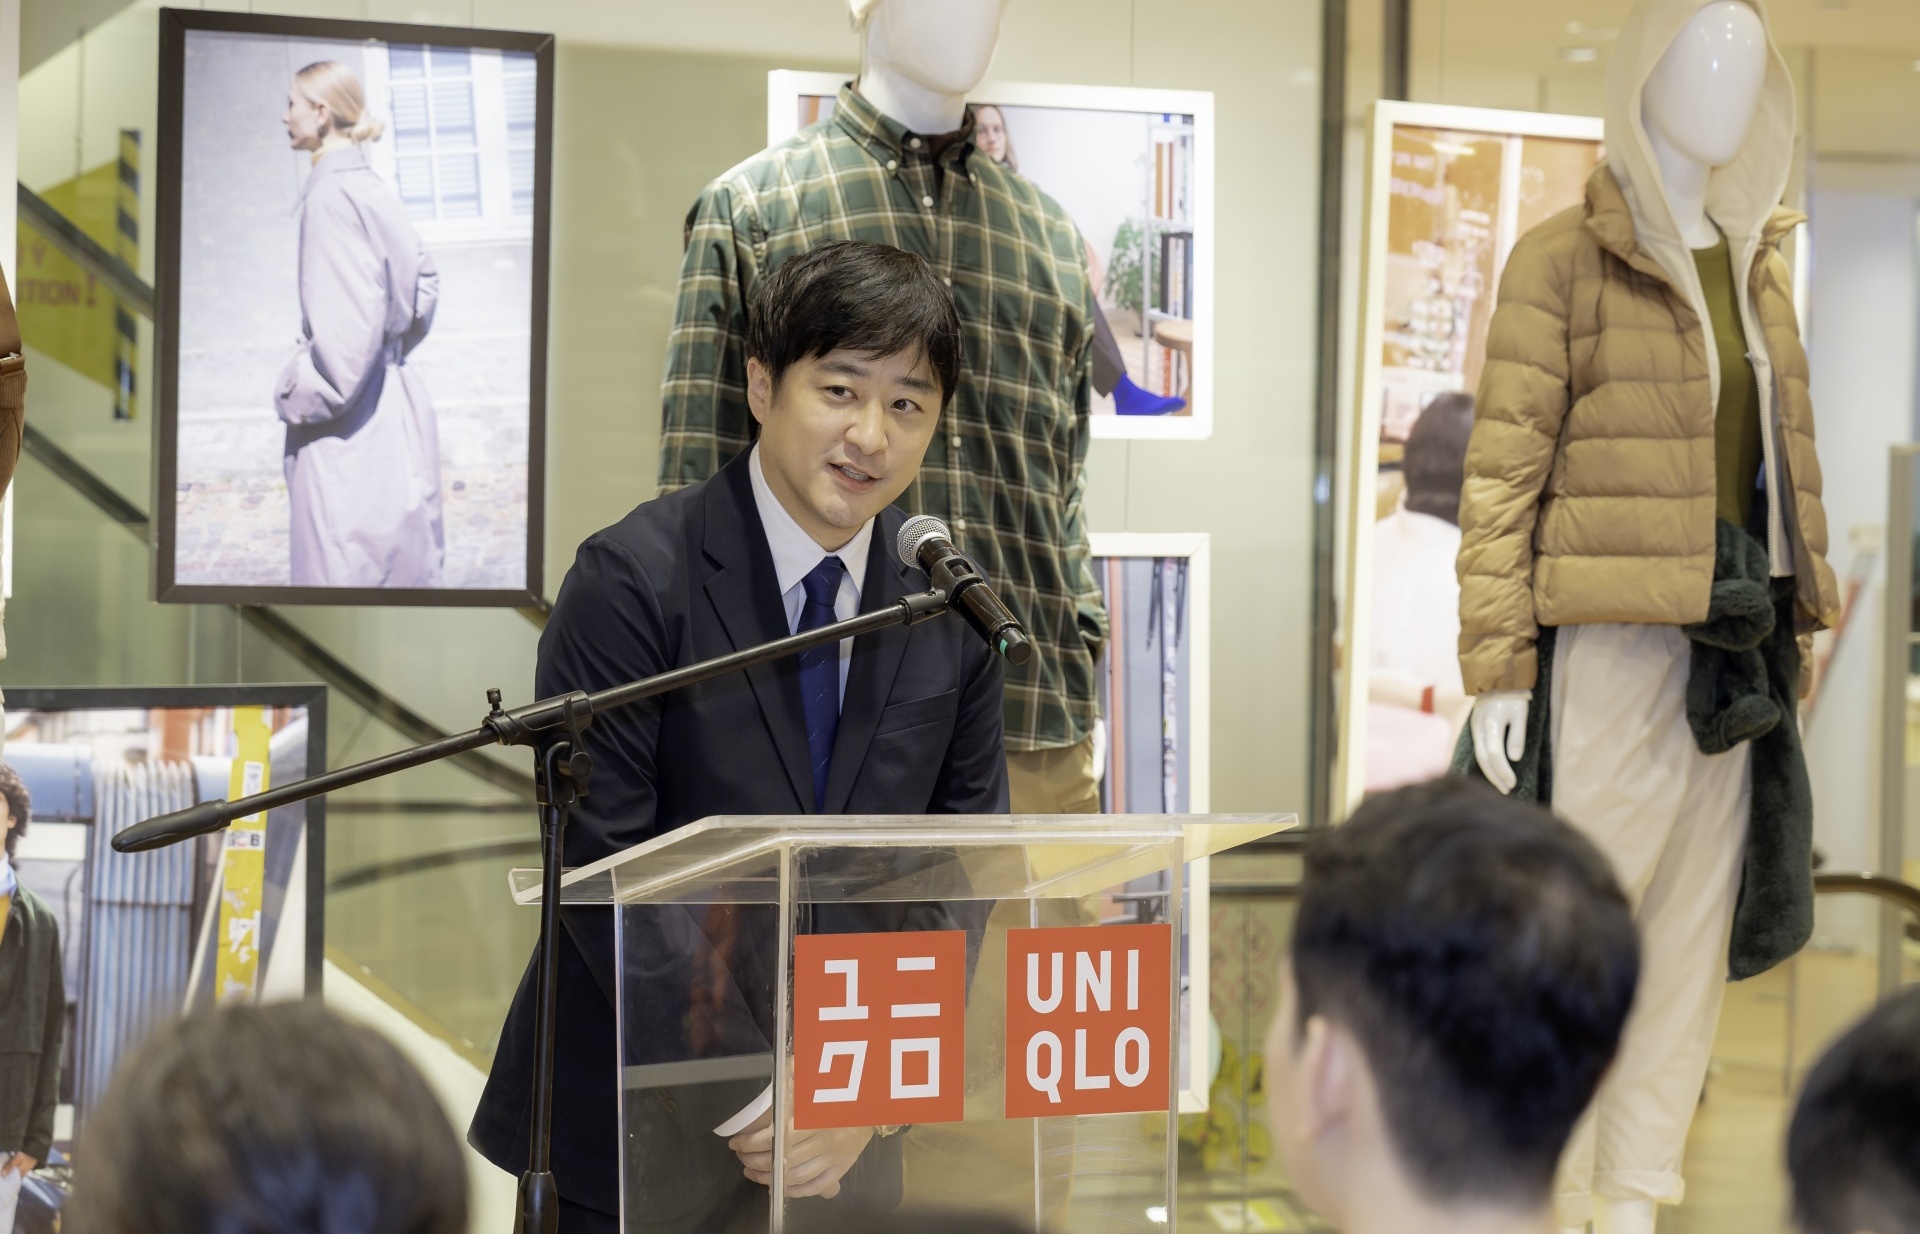 UNIQLO applies technology to its operation in Vietnam